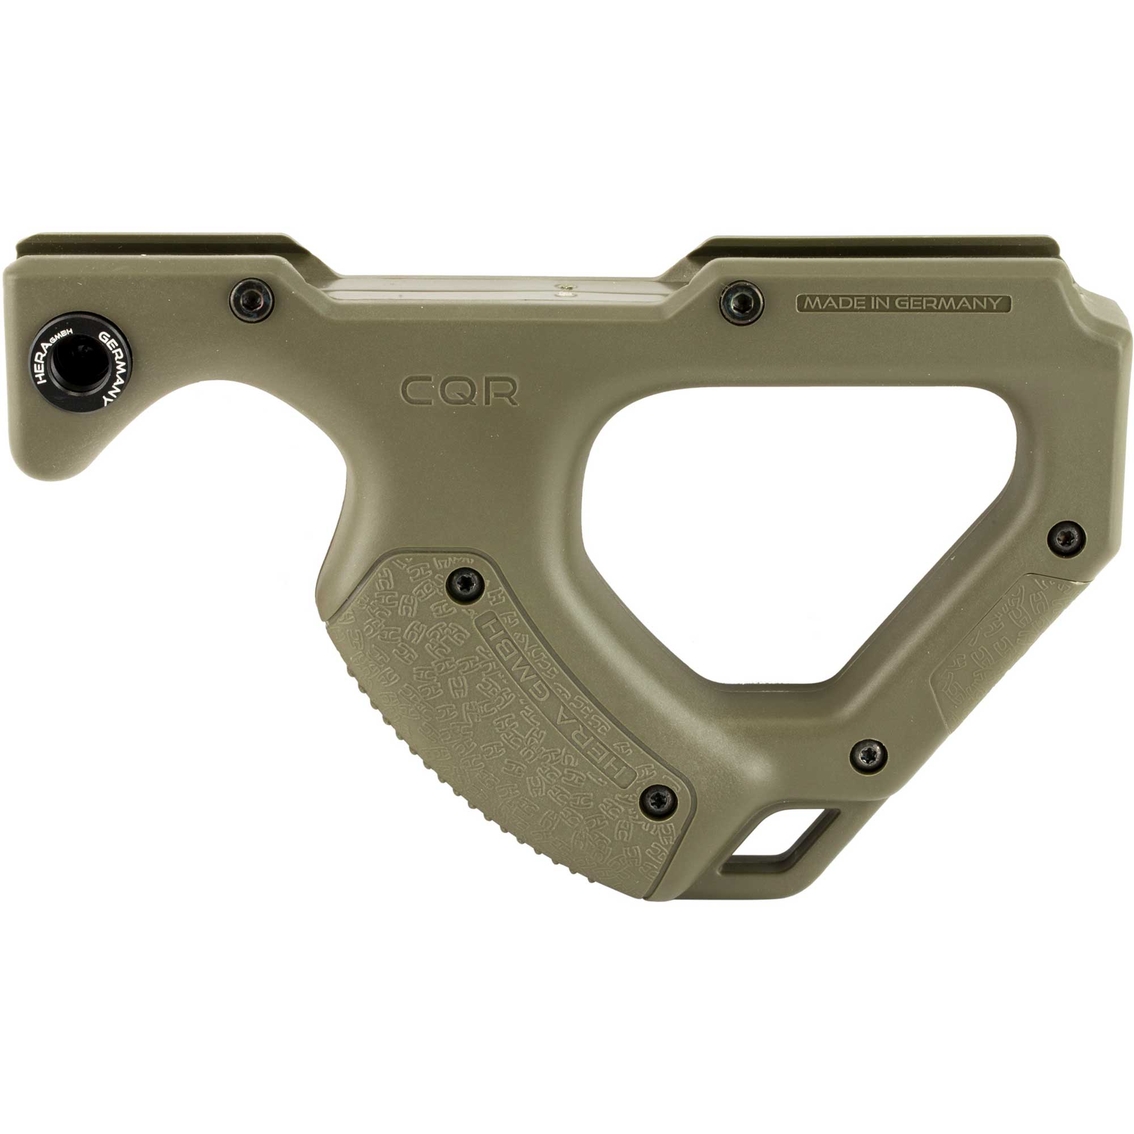 Hera USA CQR Front Grip with QD Socket Fits Picatinny Olive Drab Green - Image 2 of 2